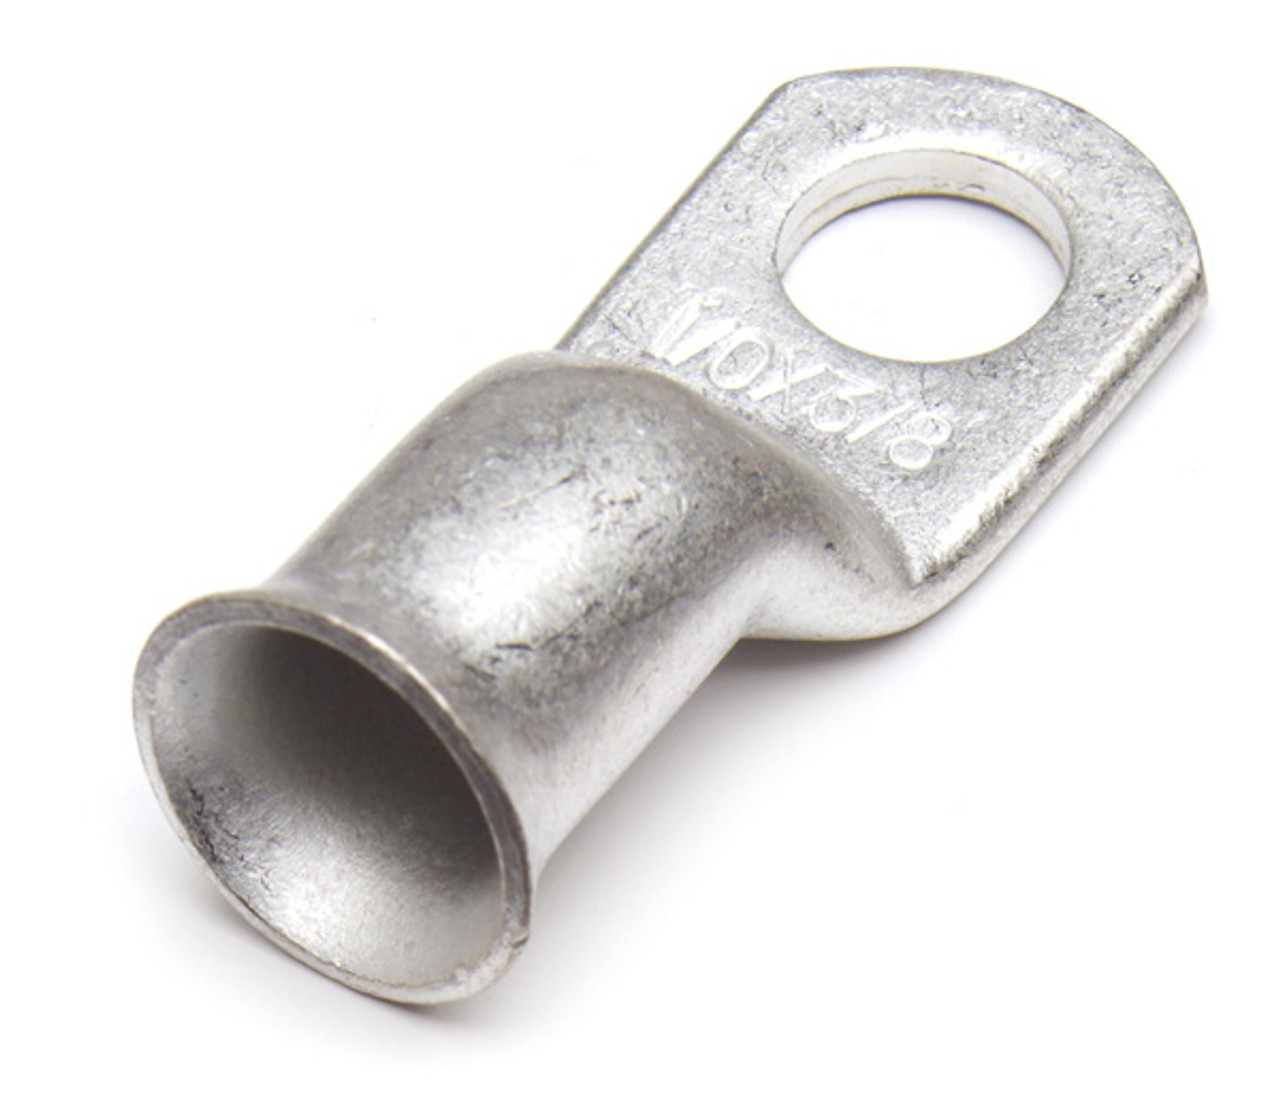 4/0 AWG Tin Plated Copper Tube Lugs 3/8" @ 2 Pack  82-9181